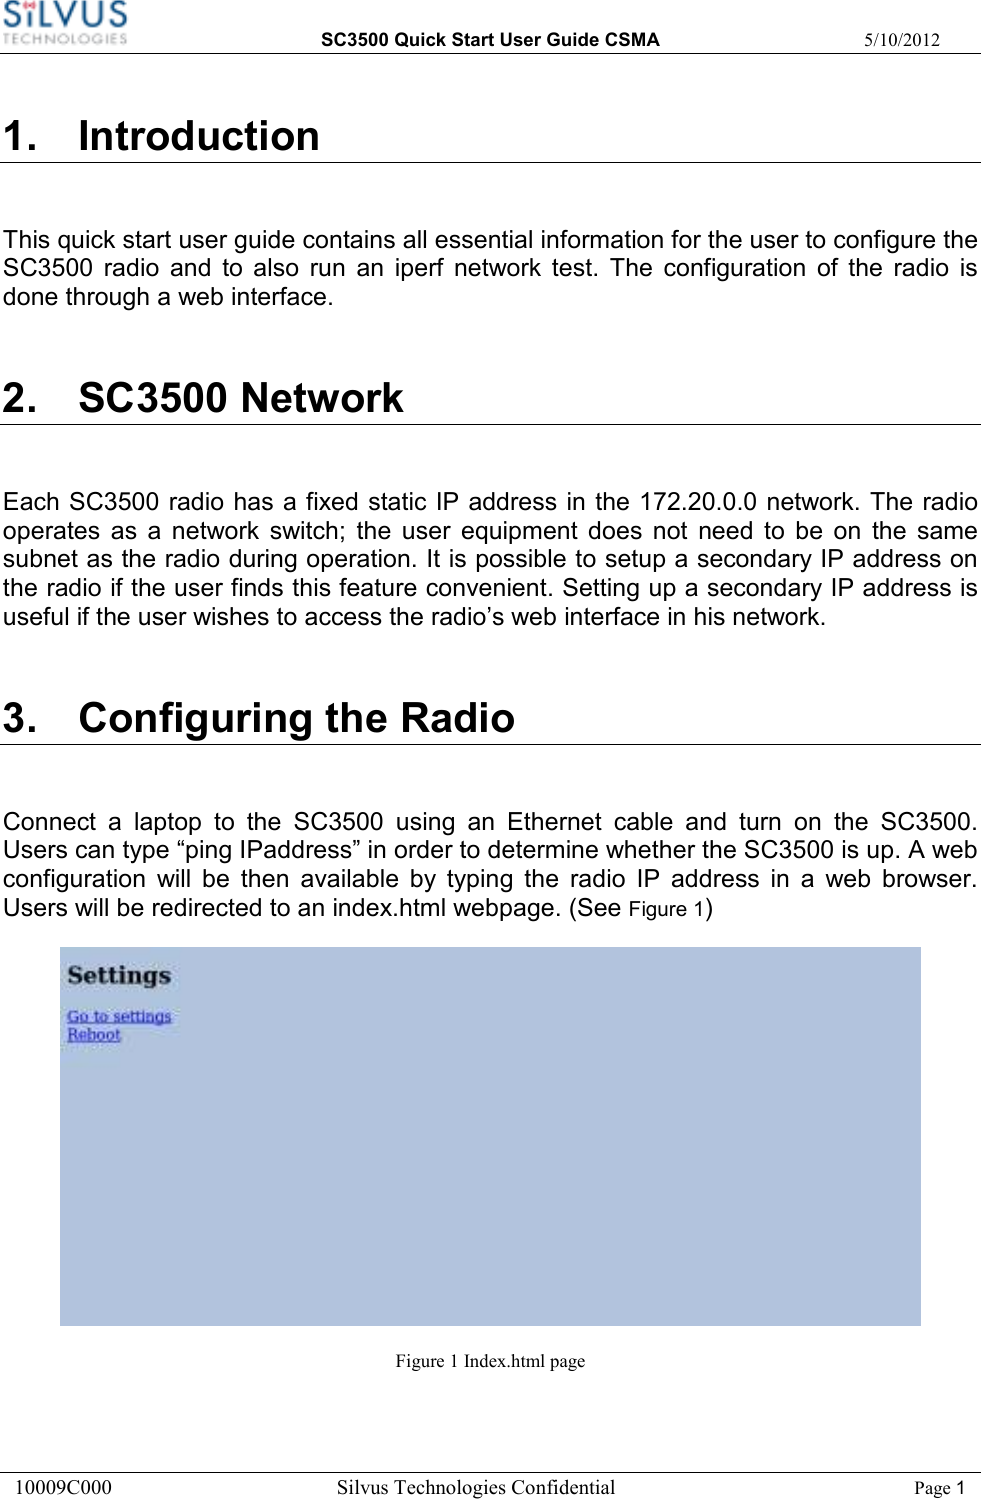  SC3500 Quick Start User Guide CSMA  5/10/2012 10009C000       Silvus Technologies Confidential    Page 1 1.  Introduction This quick start user guide contains all essential information for the user to configure the SC3500  radio  and  to  also  run  an  iperf  network  test.  The  configuration  of  the  radio  is done through a web interface.   2.  SC3500 Network Each SC3500 radio has a fixed static IP address in the 172.20.0.0 network. The radio operates  as  a  network  switch;  the  user  equipment  does  not  need  to  be  on  the  same subnet as the radio during operation. It is possible to setup a secondary IP address on the radio if the user finds this feature convenient. Setting up a secondary IP address is useful if the user wishes to access the radio’s web interface in his network.  3.  Configuring the Radio  Connect  a  laptop  to  the  SC3500  using  an  Ethernet  cable  and  turn  on  the  SC3500. Users can type “ping IPaddress” in order to determine whether the SC3500 is up. A web configuration  will  be  then  available  by  typing  the  radio  IP  address  in  a  web  browser. Users will be redirected to an index.html webpage. (See Figure 1)  Figure 1 Index.html page 